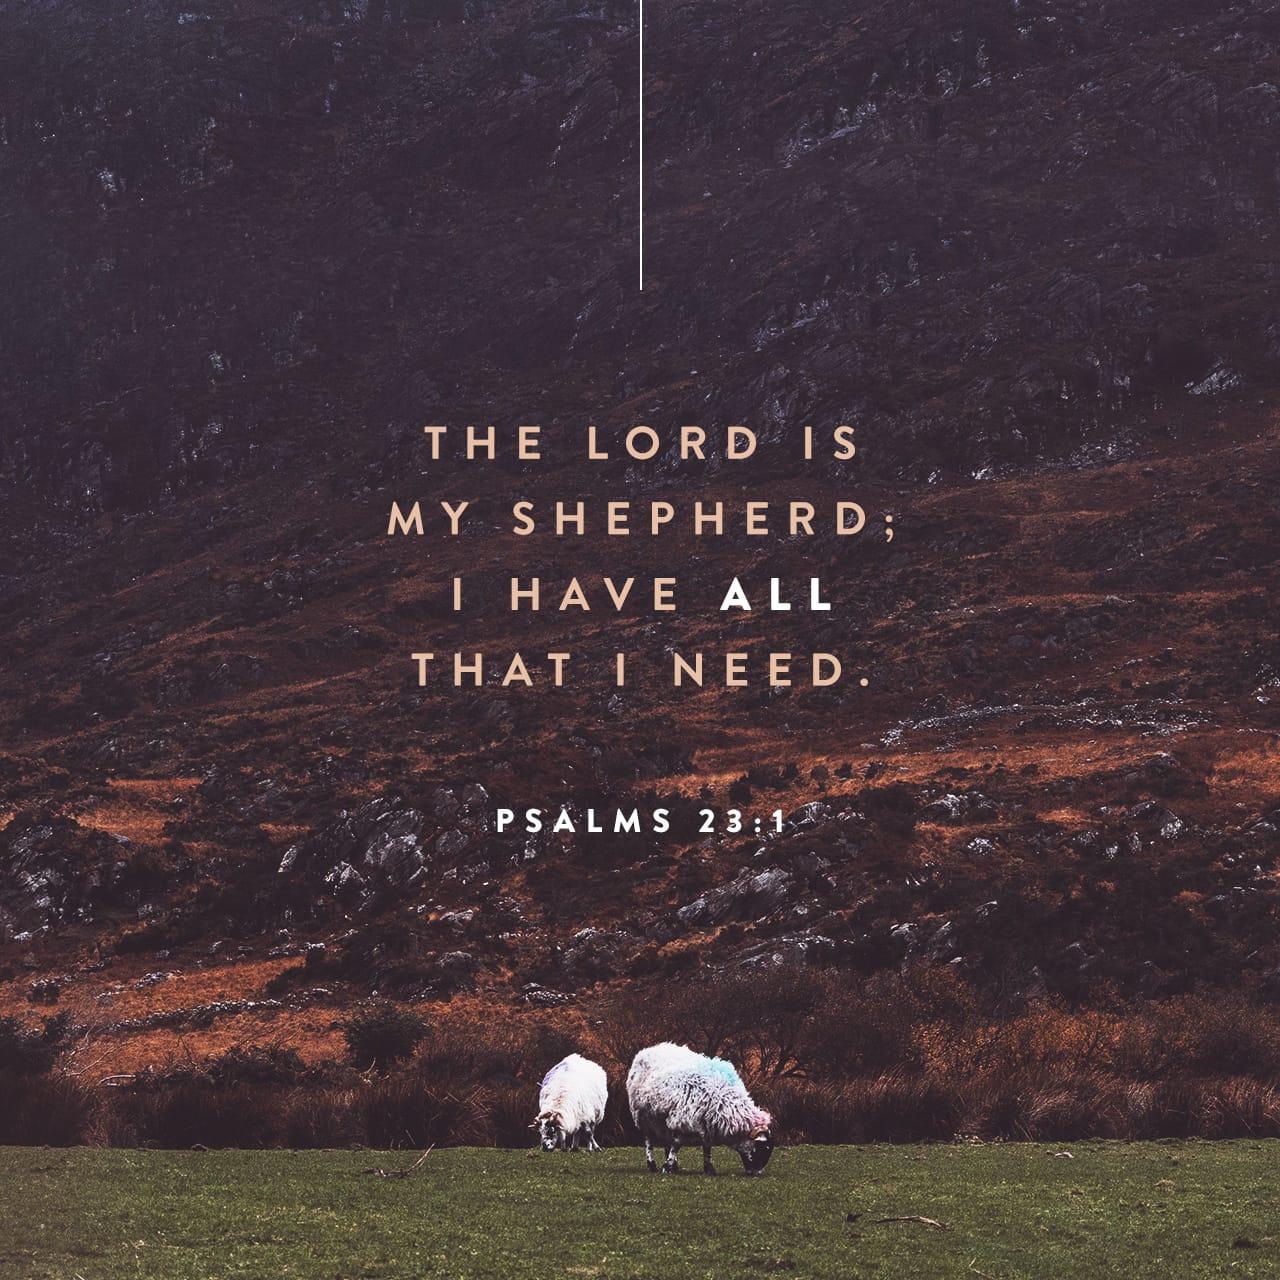 Bible Verse of the Day - day 90 - image 37593 (Psalms 23:1-3)